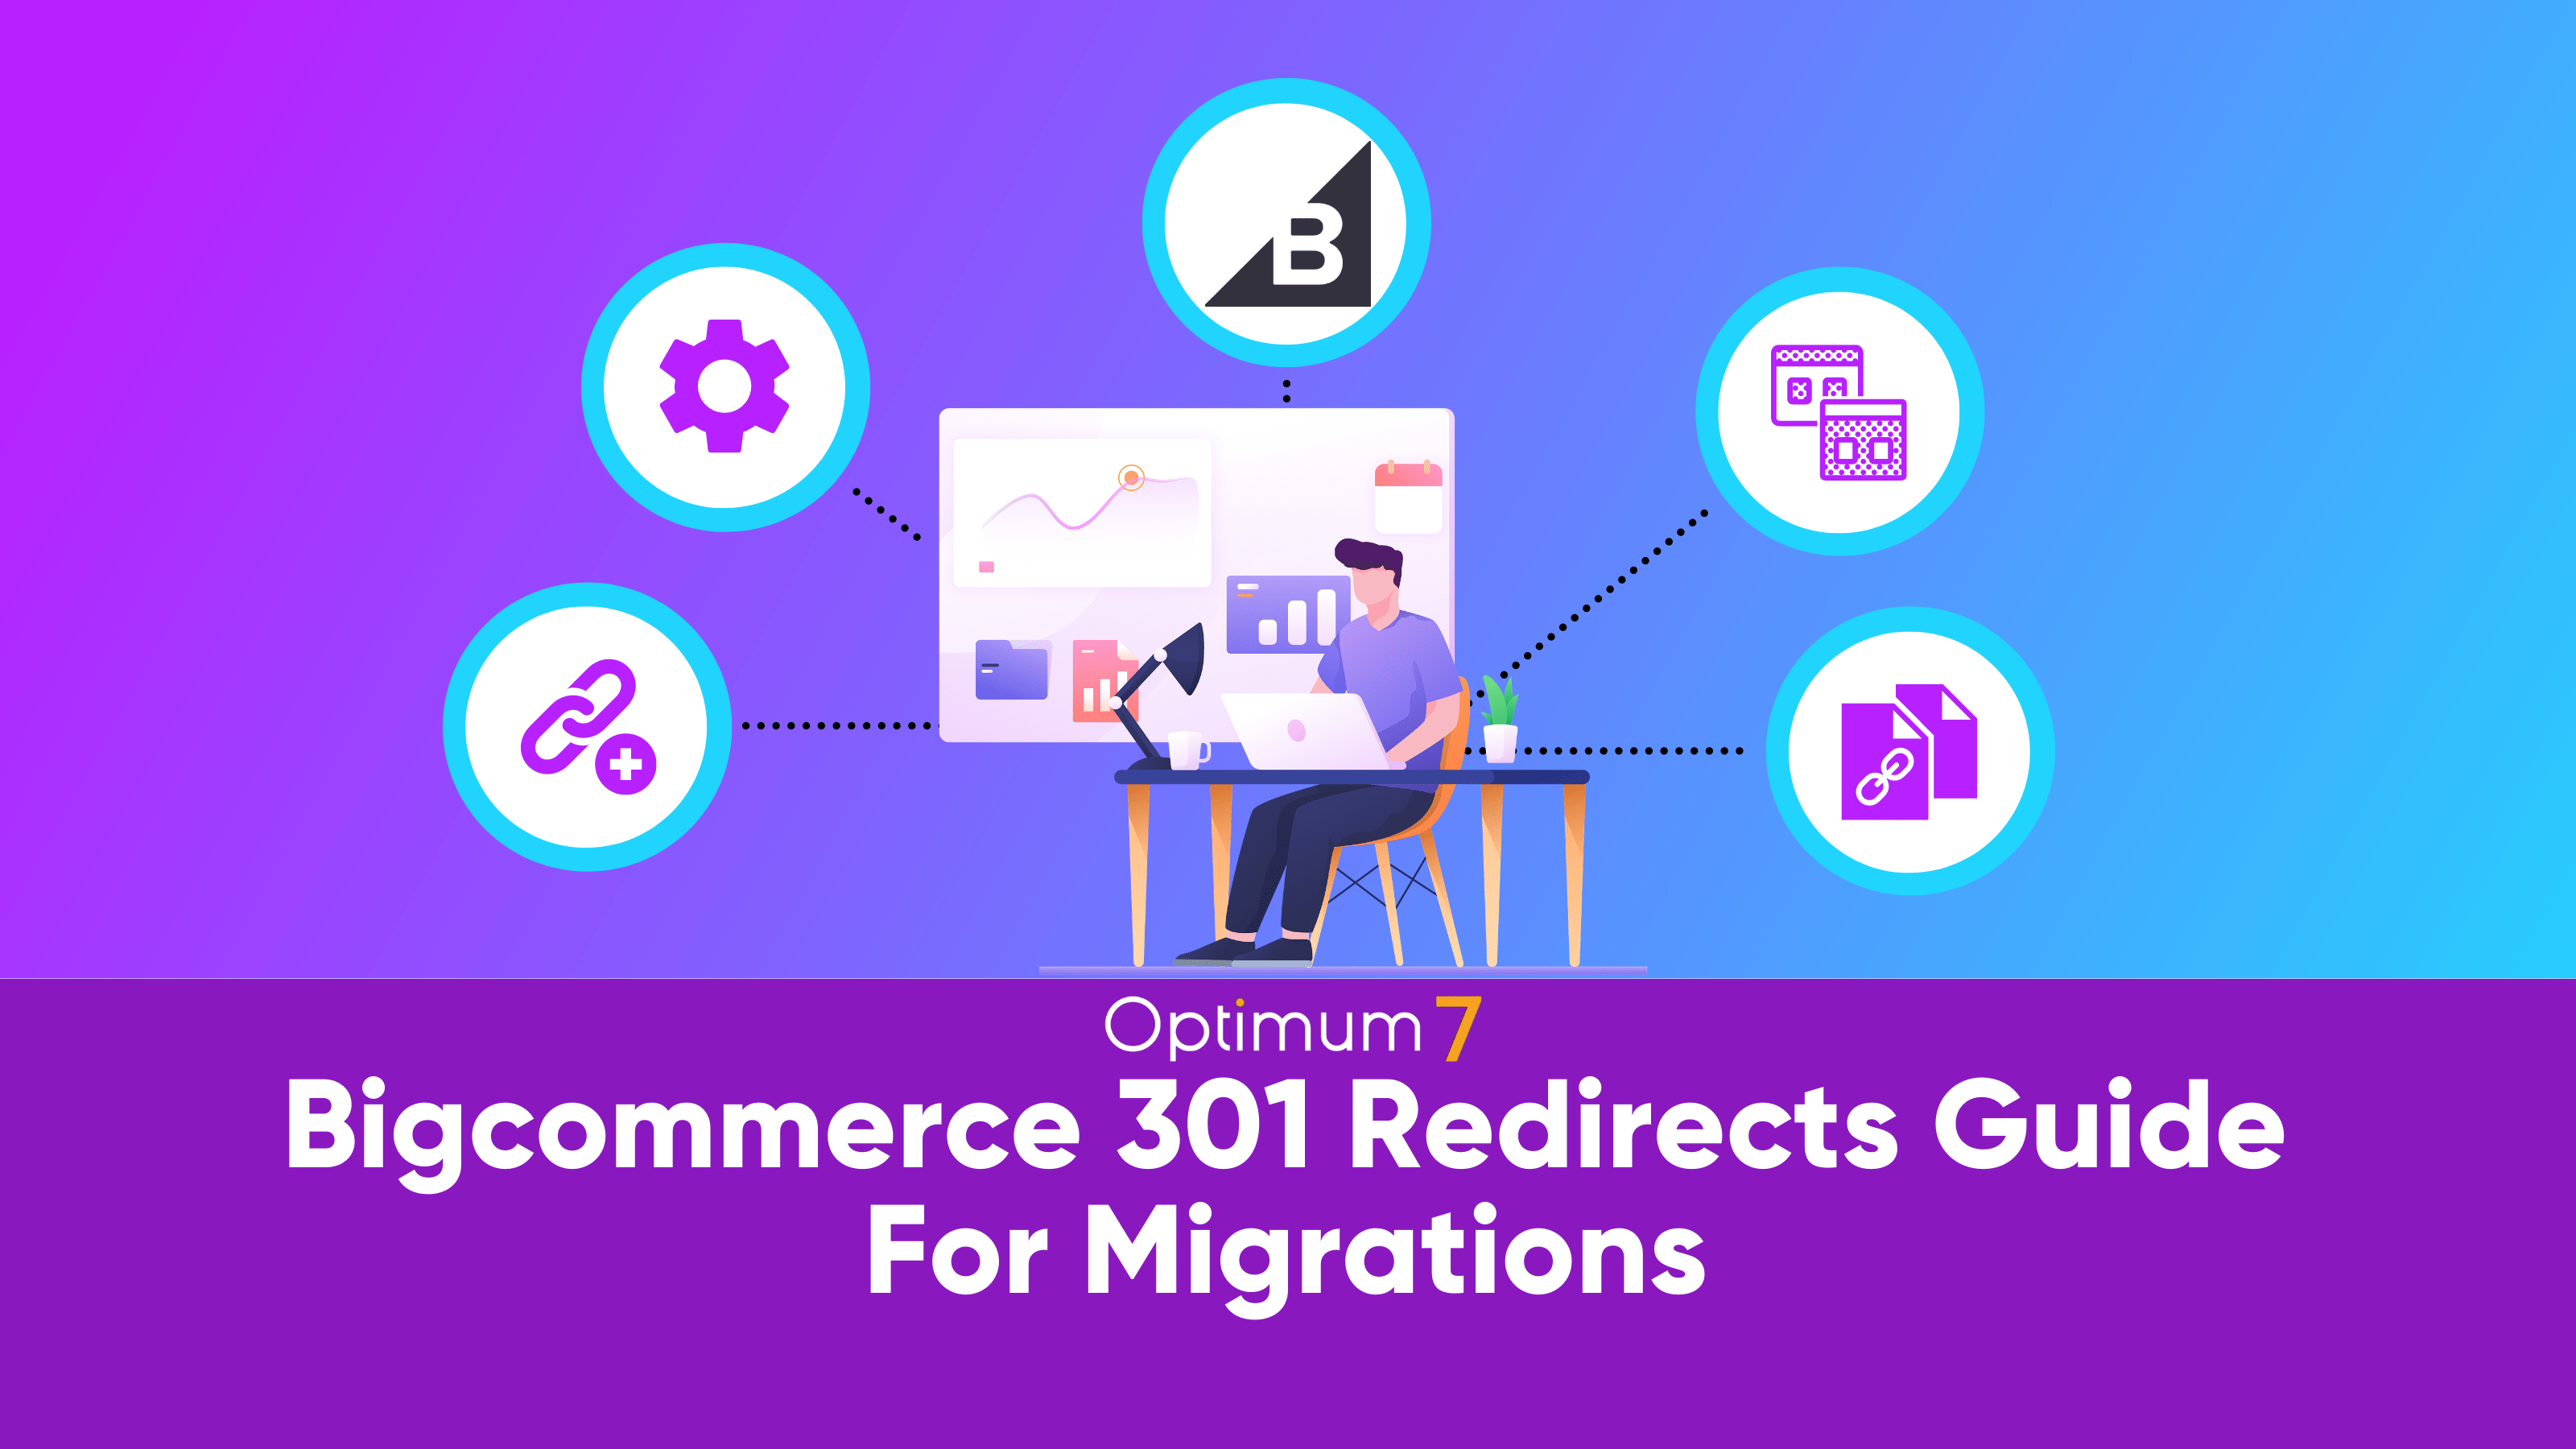 BigCommerce 301 Redirects Guide for Migrations